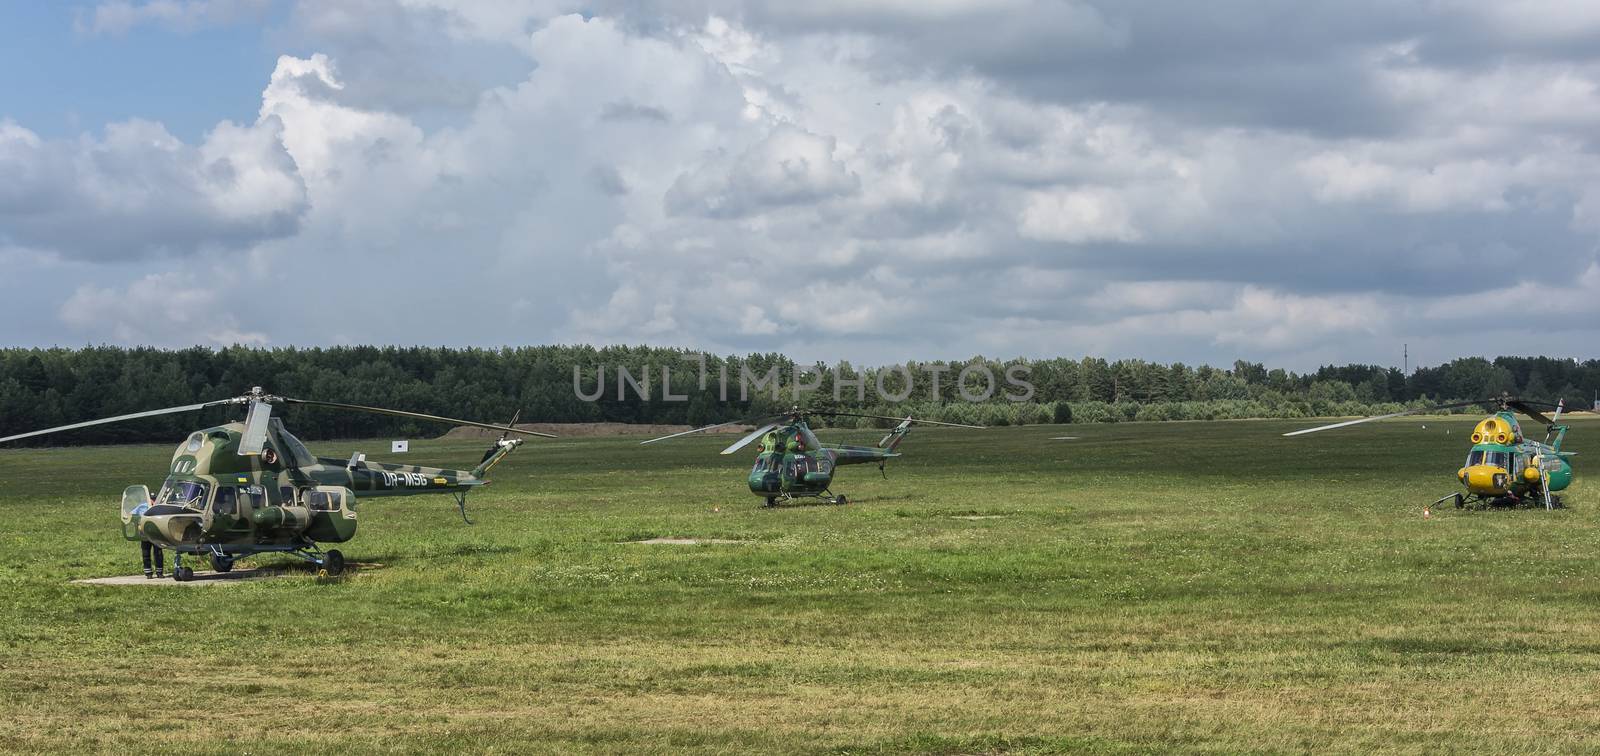 Helicopters of teams of participants of the 16th World Helicopte by Grommik